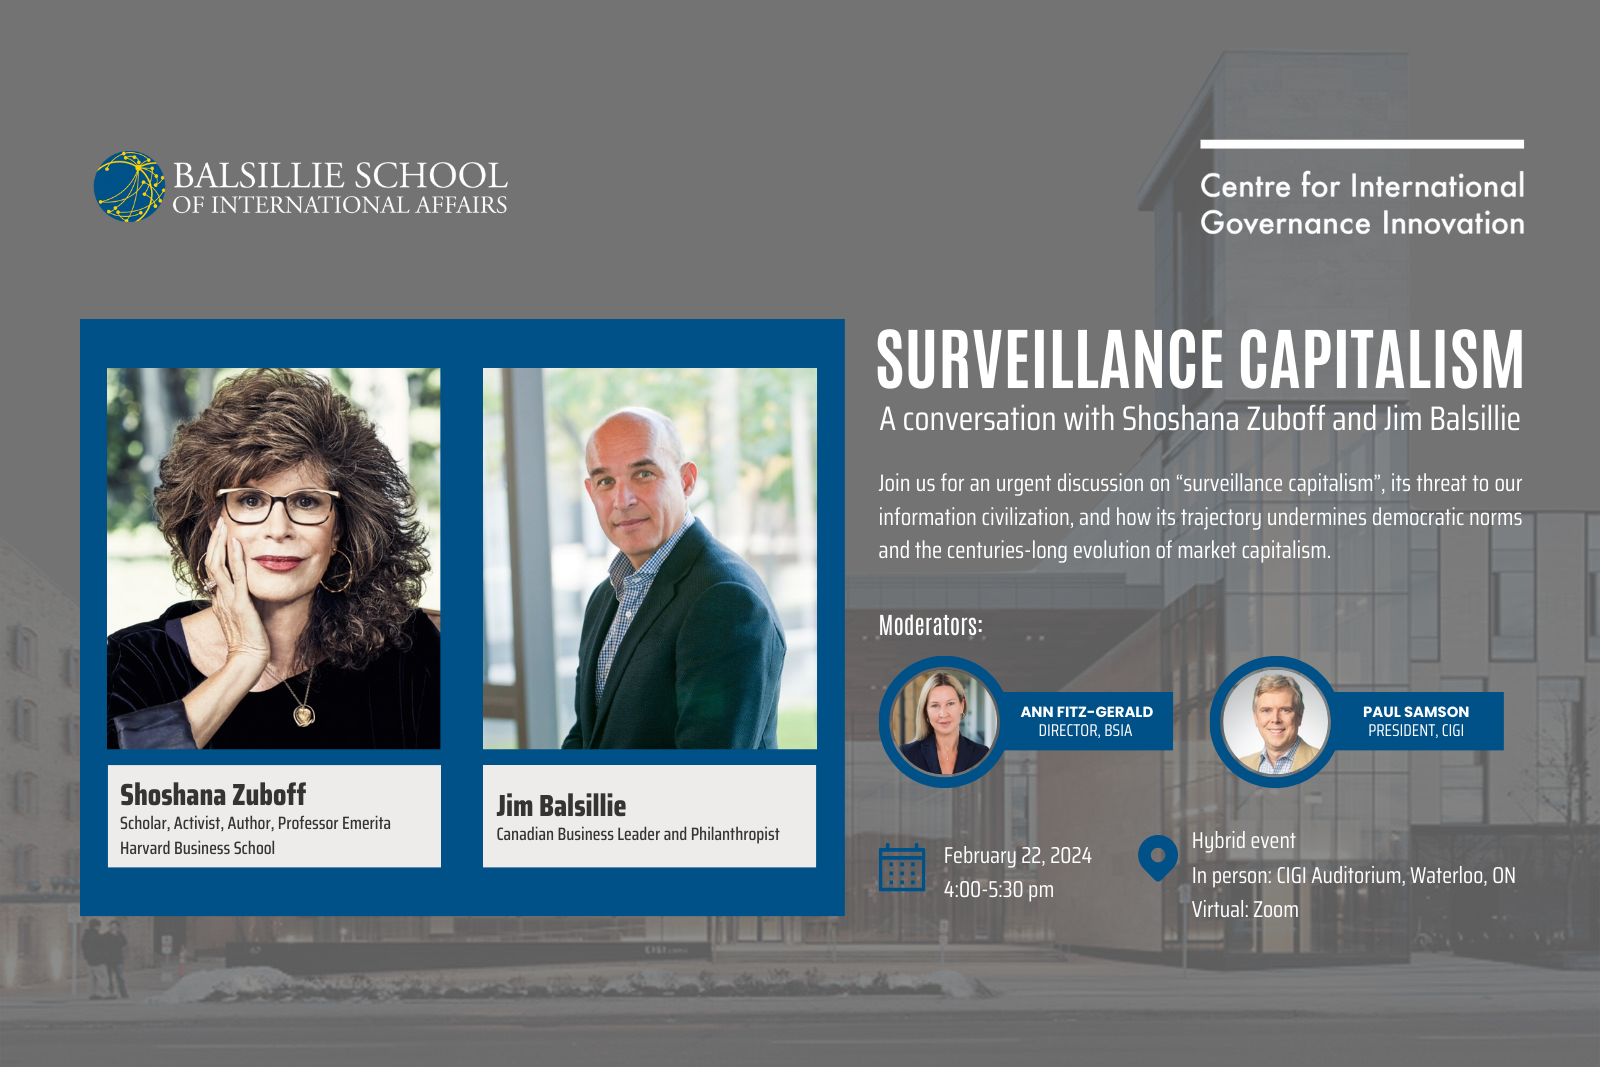 Larger photos of Shoshana Zuboff and Jim Balsillie, along with smaller photos of Ann Fitz-Gerald and Paul Samson, on a grey background that has an image of the CIGI Campus building in the background.